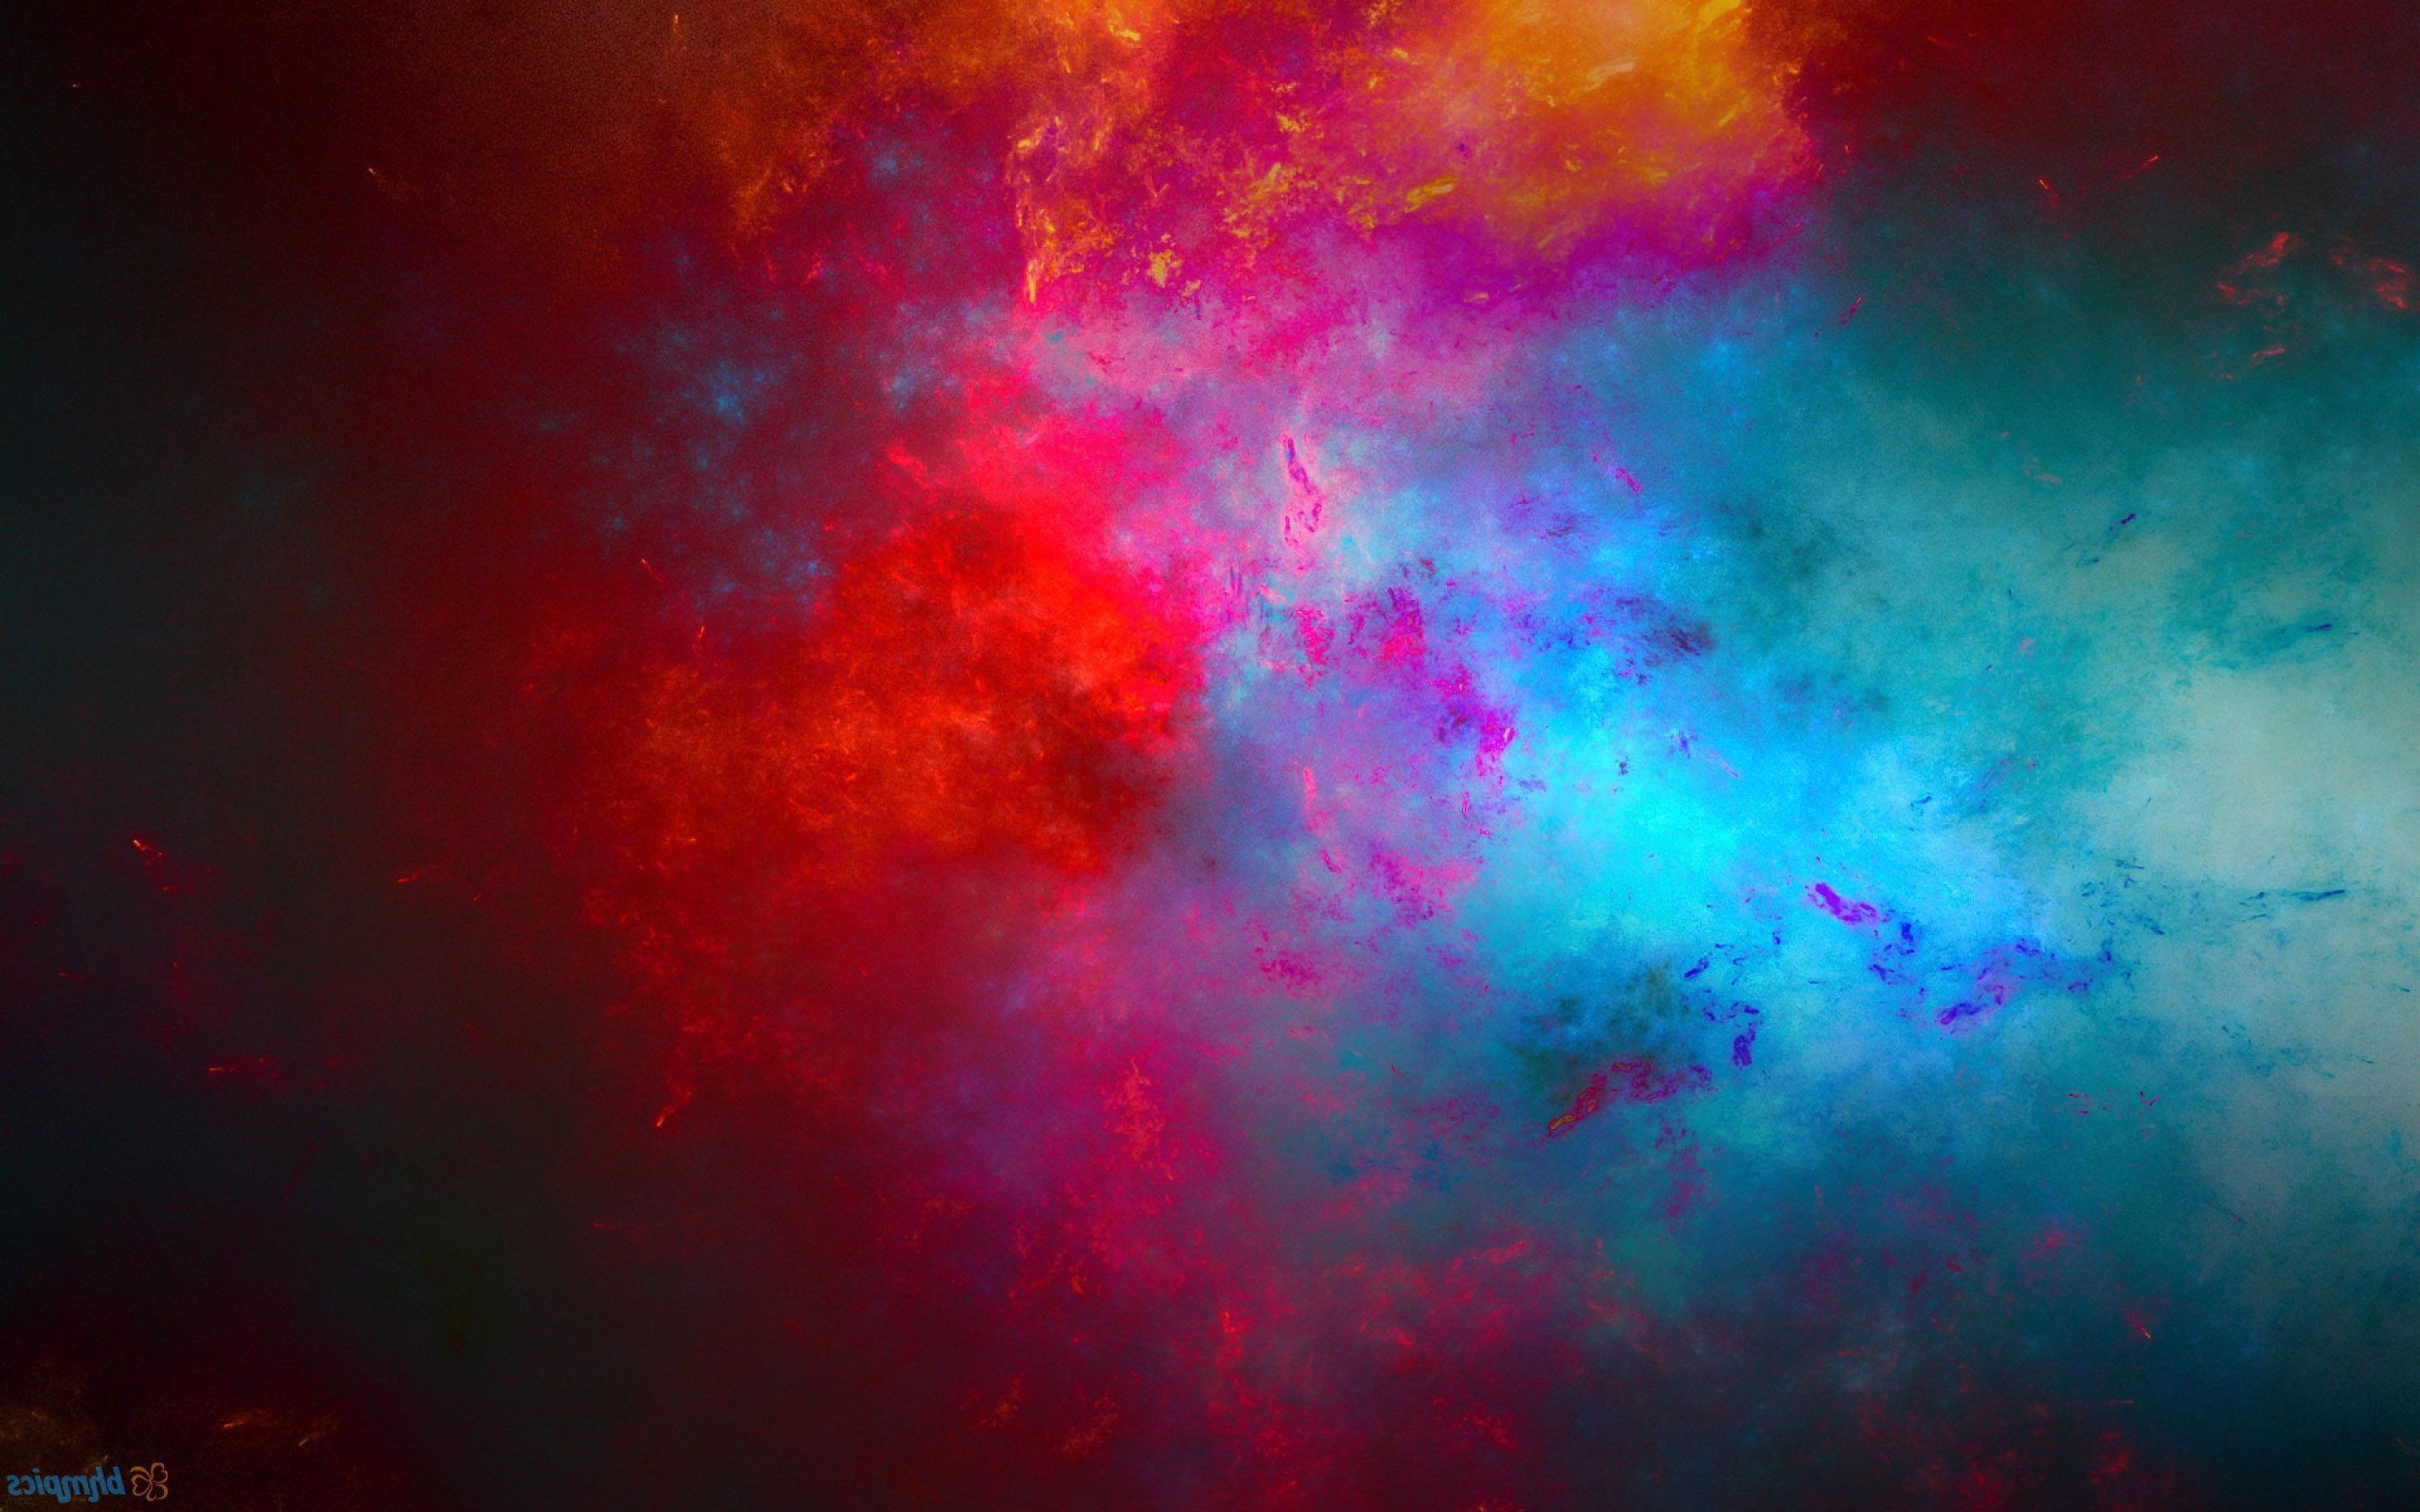 Download this awesome wallpaper. Abstrak, Galaxy wallpaper, Painting